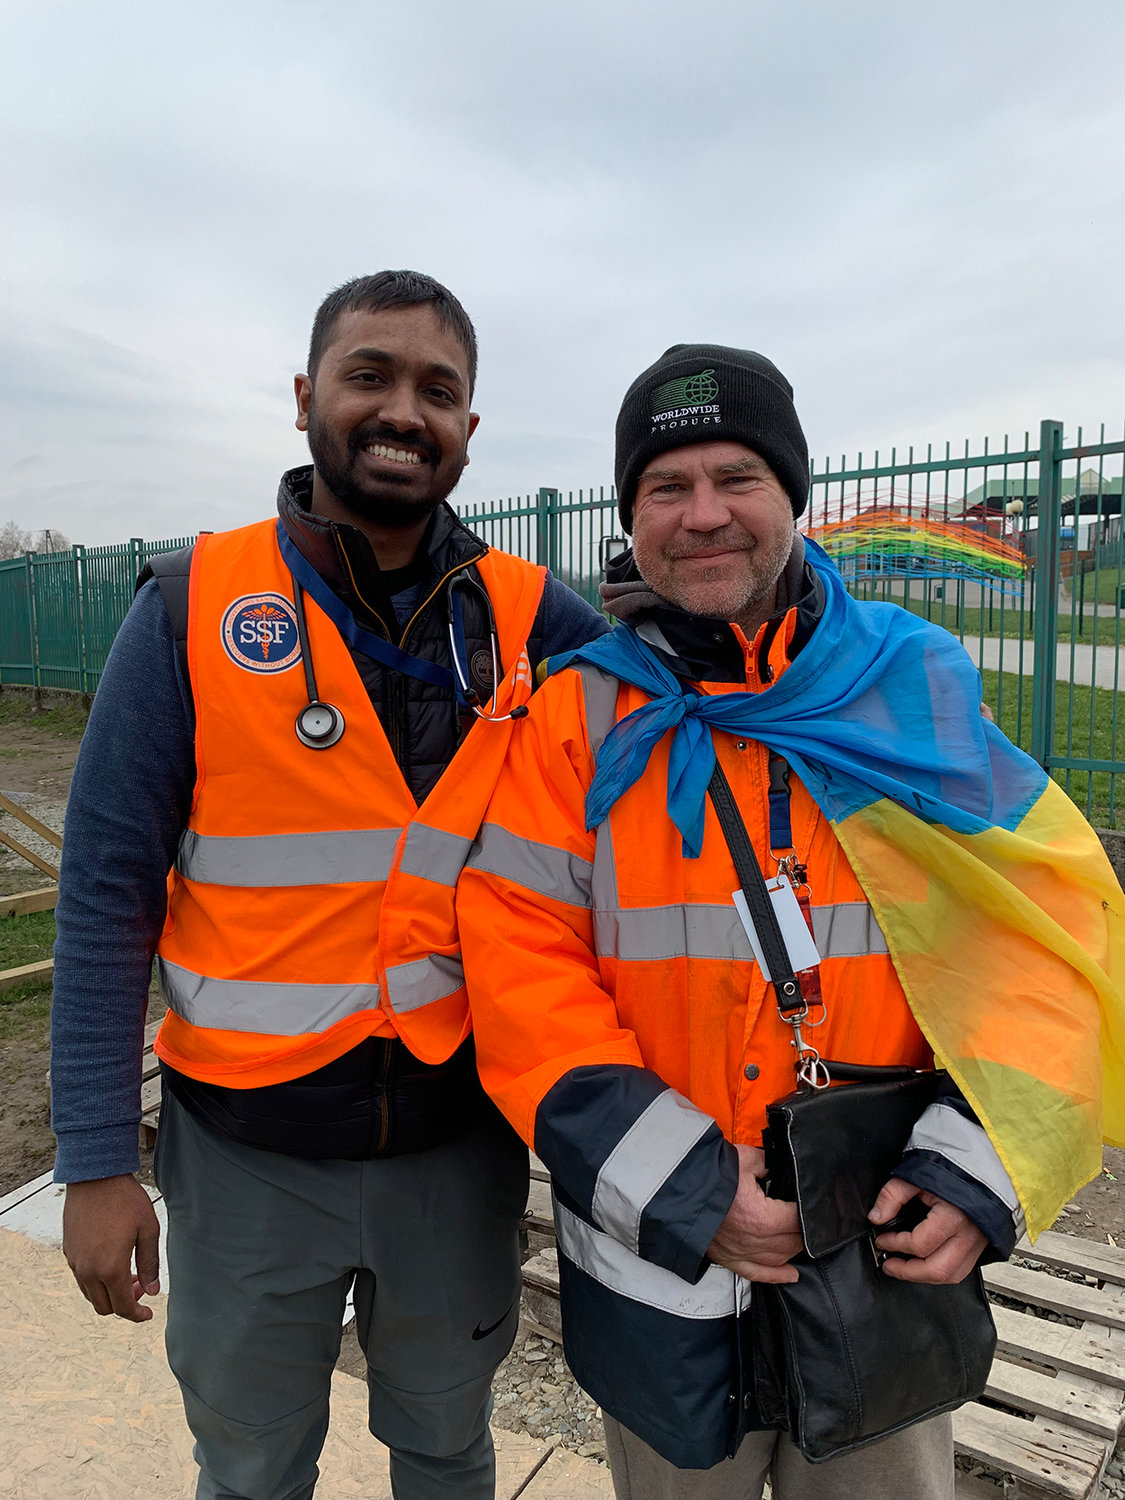 Dr. Chaitanya Rojulpote of Scranton, a second-year internal medicine resident at the Wright Center for Graduate Medical Education, poses with Sasha, a Ukrainian refugee who greets people at the border gate between Medyka, Poland and Ukraine.